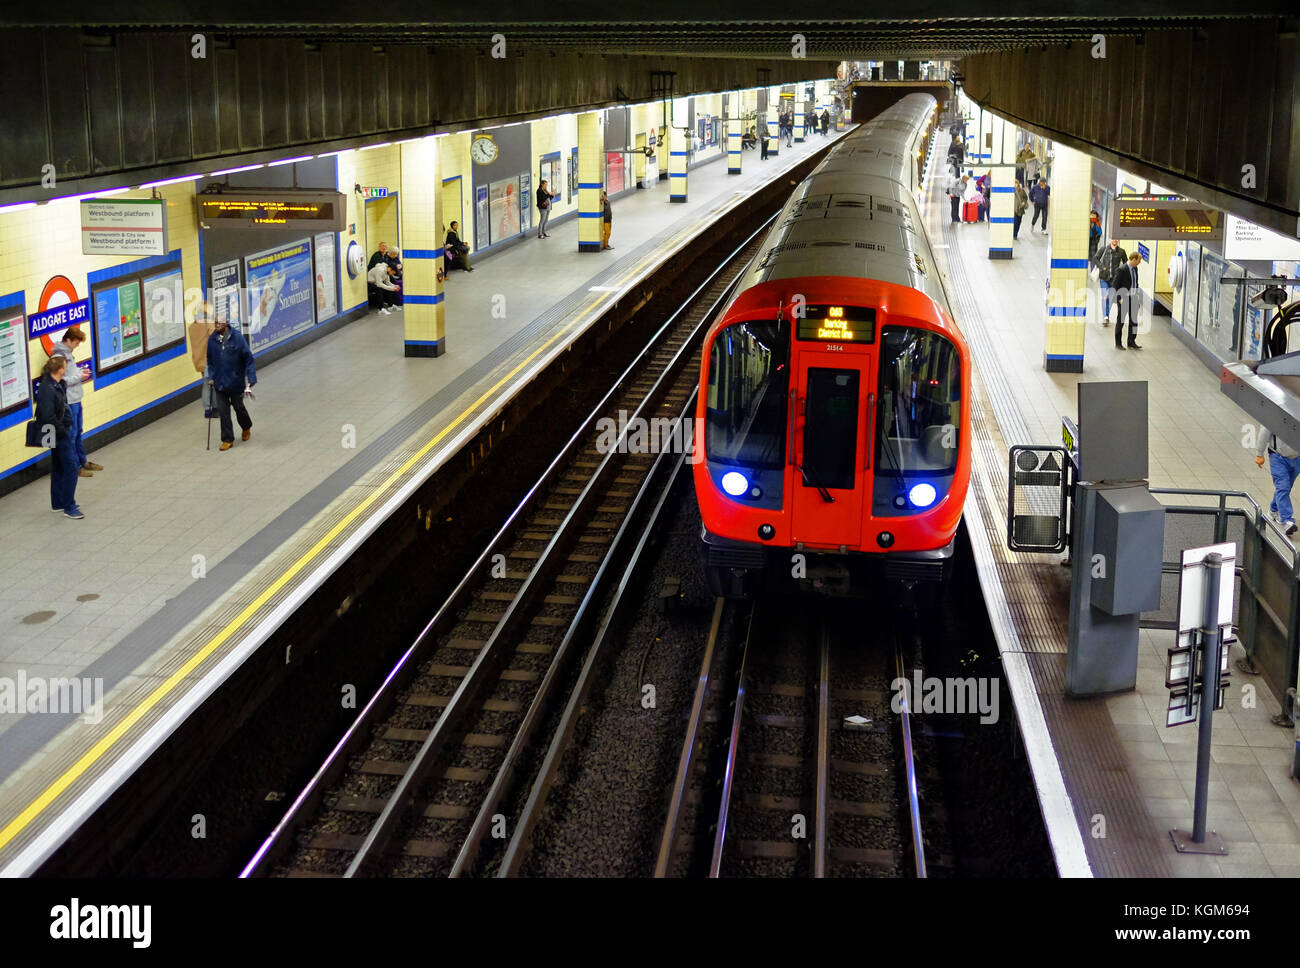 An underground train at the platform of Aldgate East station on the London Underground system with commuters waiting Stock Photo